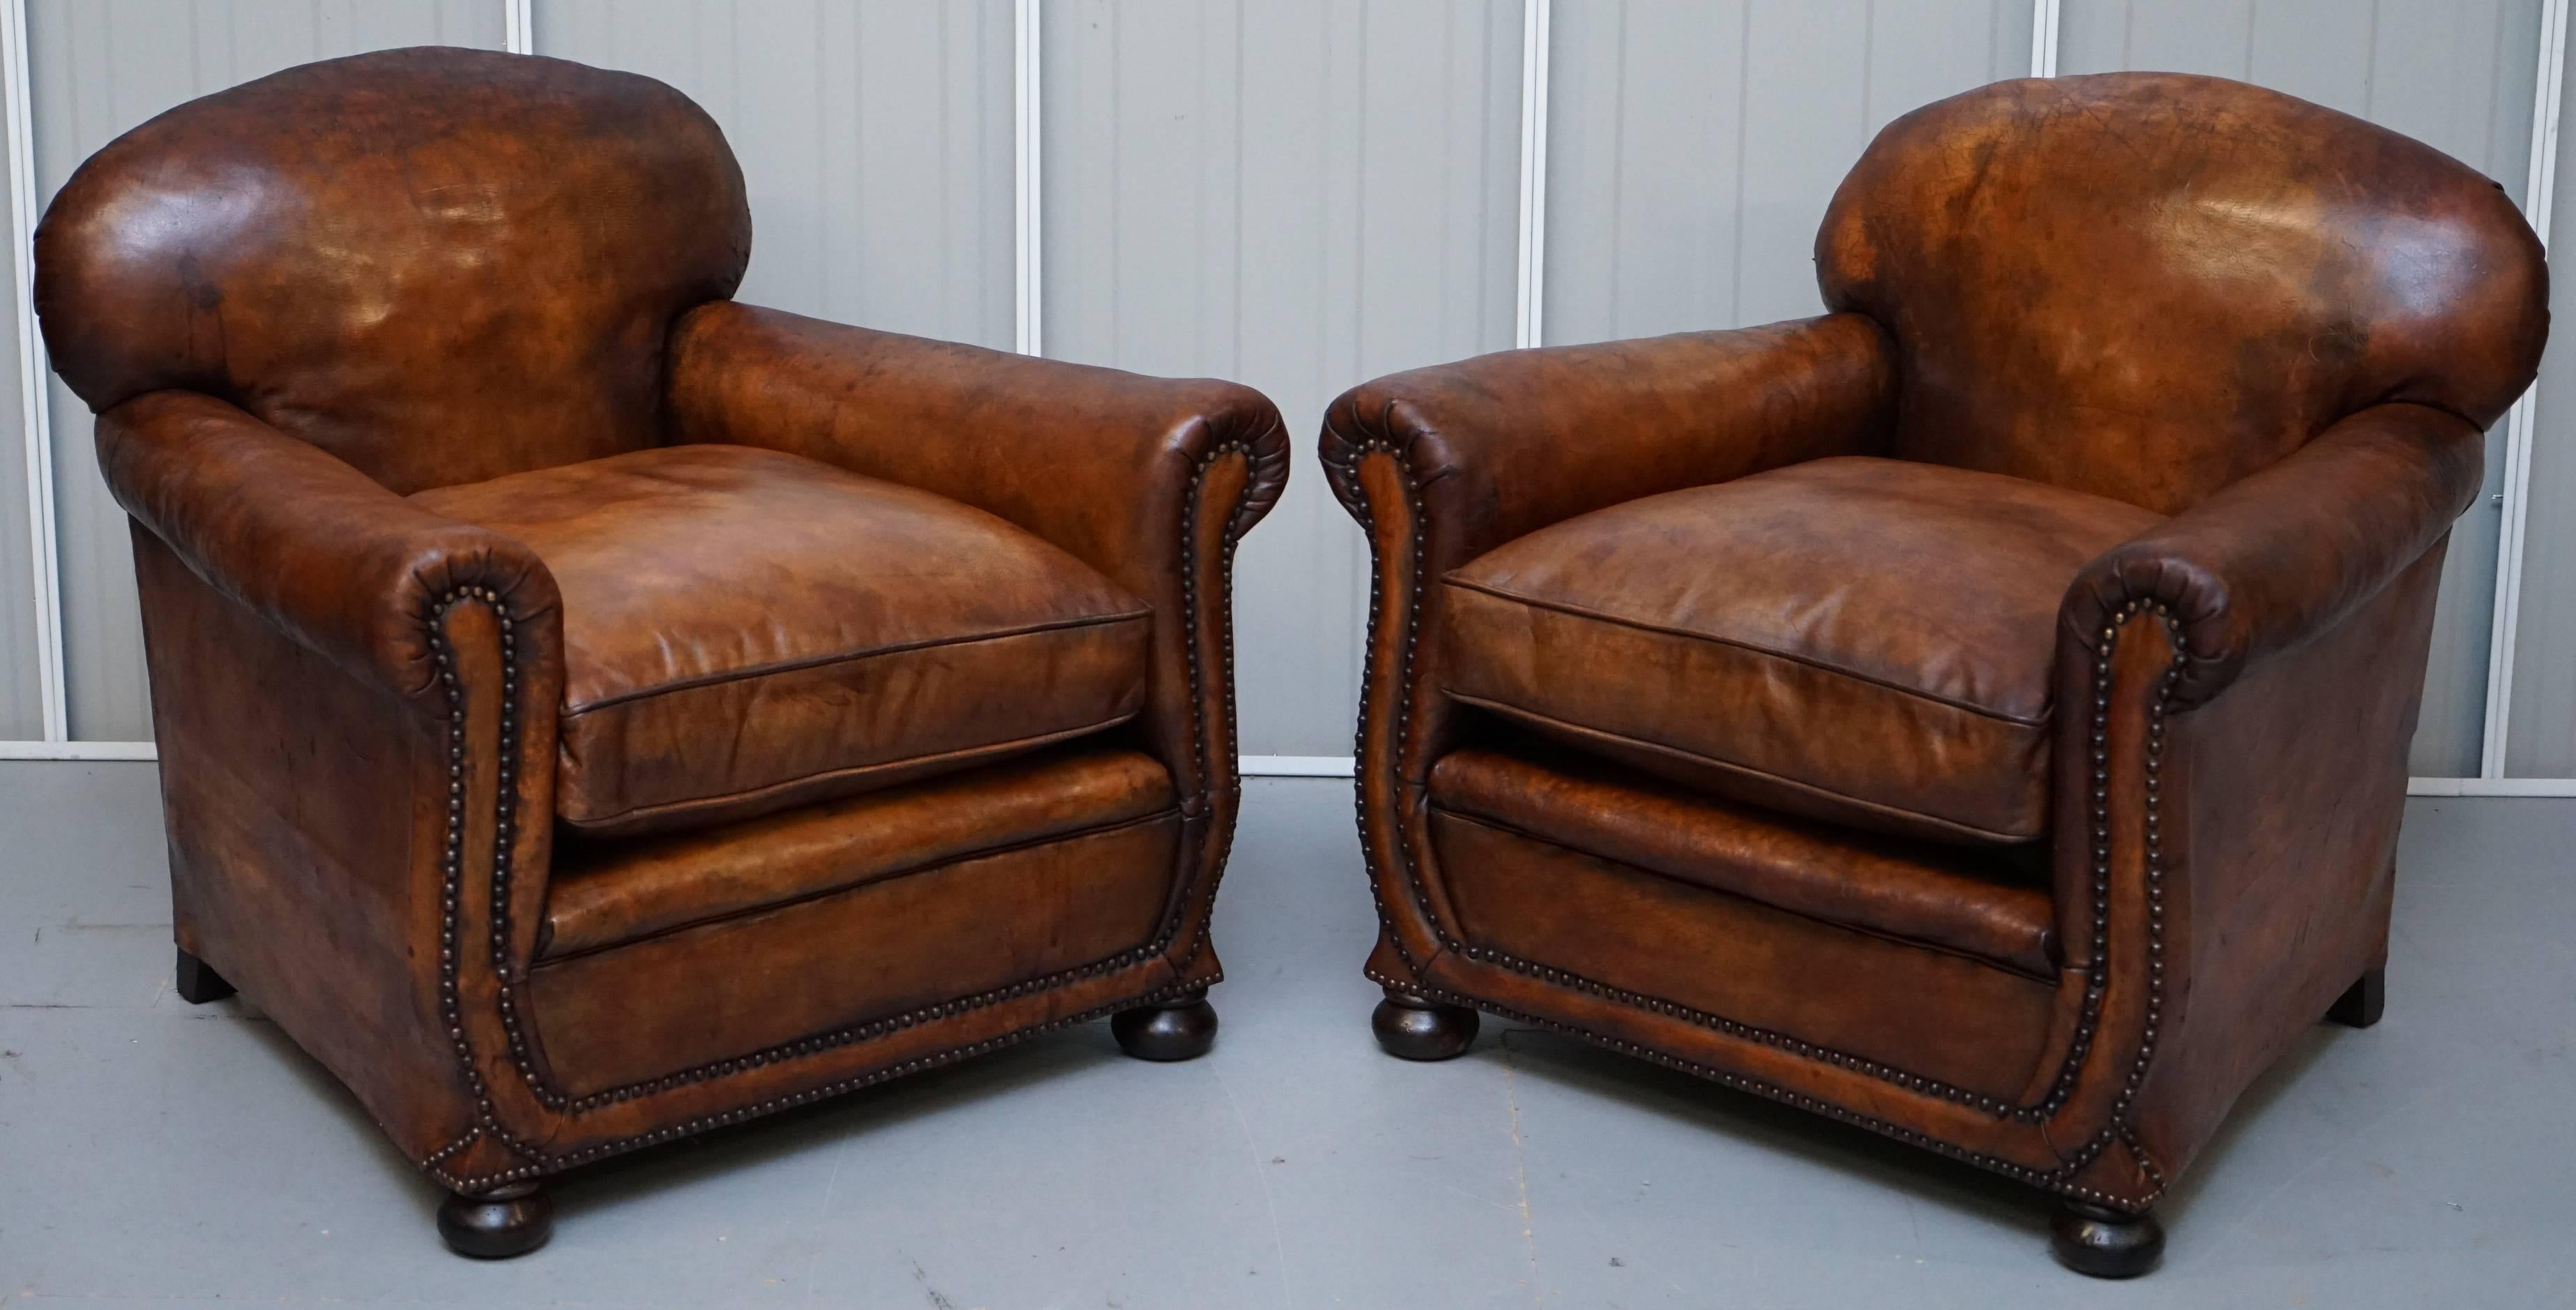 We are delighted to offer for sale this lovely original circa 1910 Edwardian restored hand dyed whiskey brown leather Gentleman's Club three piece suite to include a two-three seat sofa and pair of matching armchairs 

Please note the delivery fee